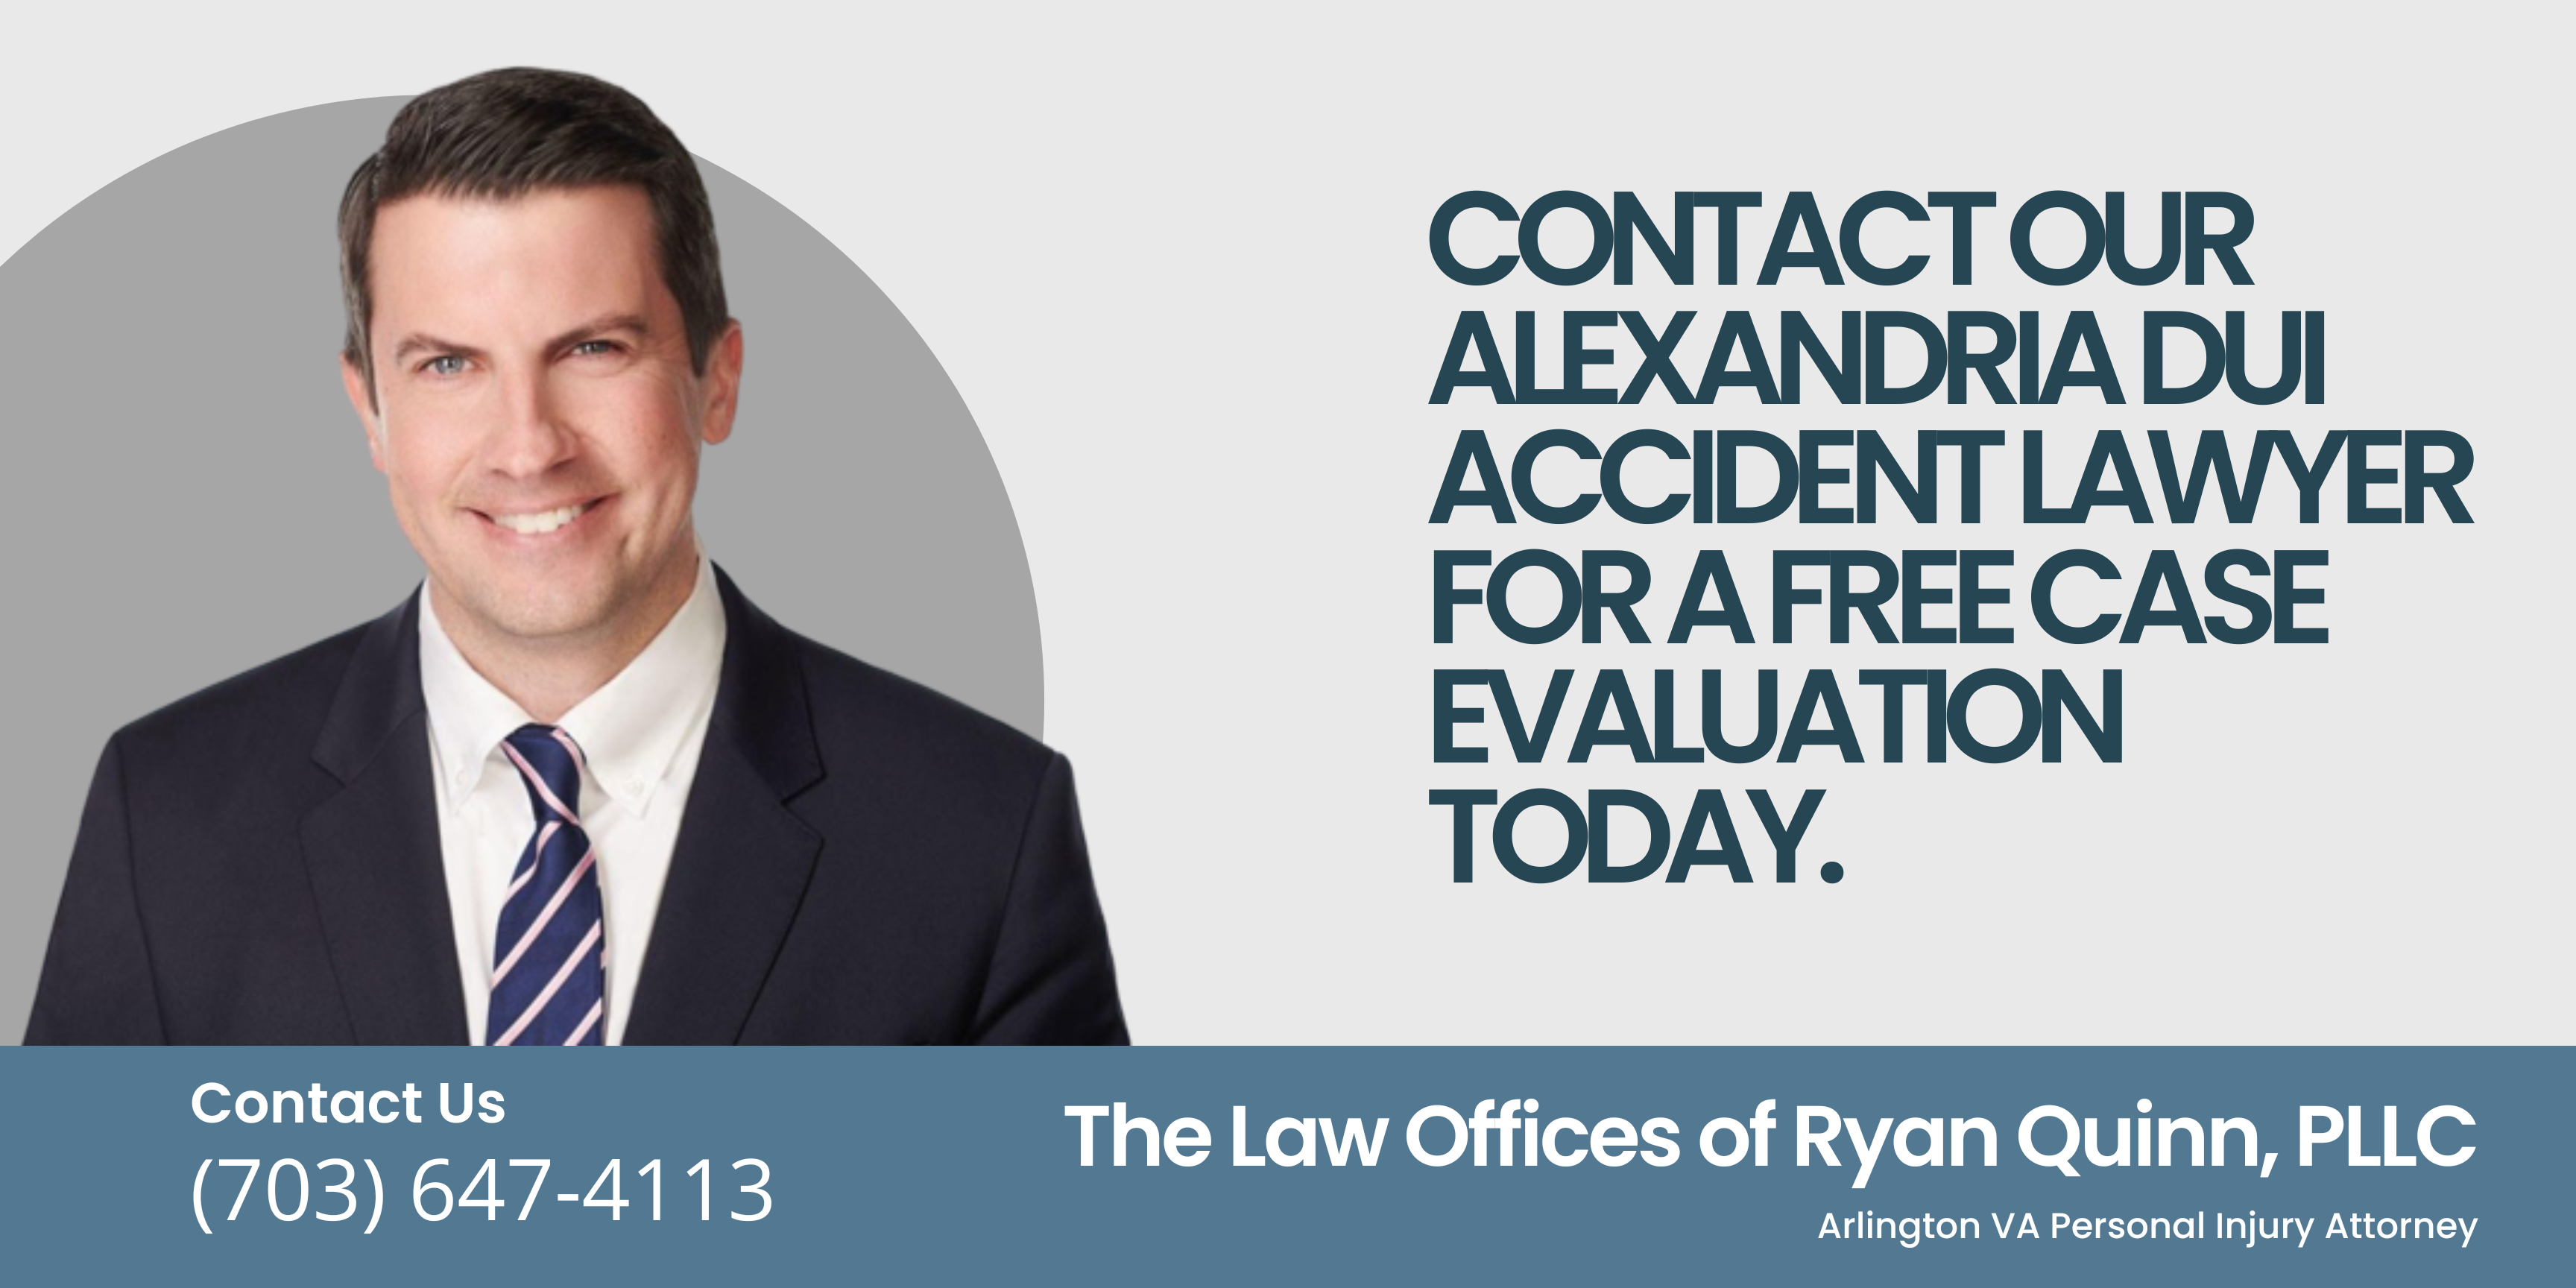 contact our Alexandria DUI Accident Lawyer